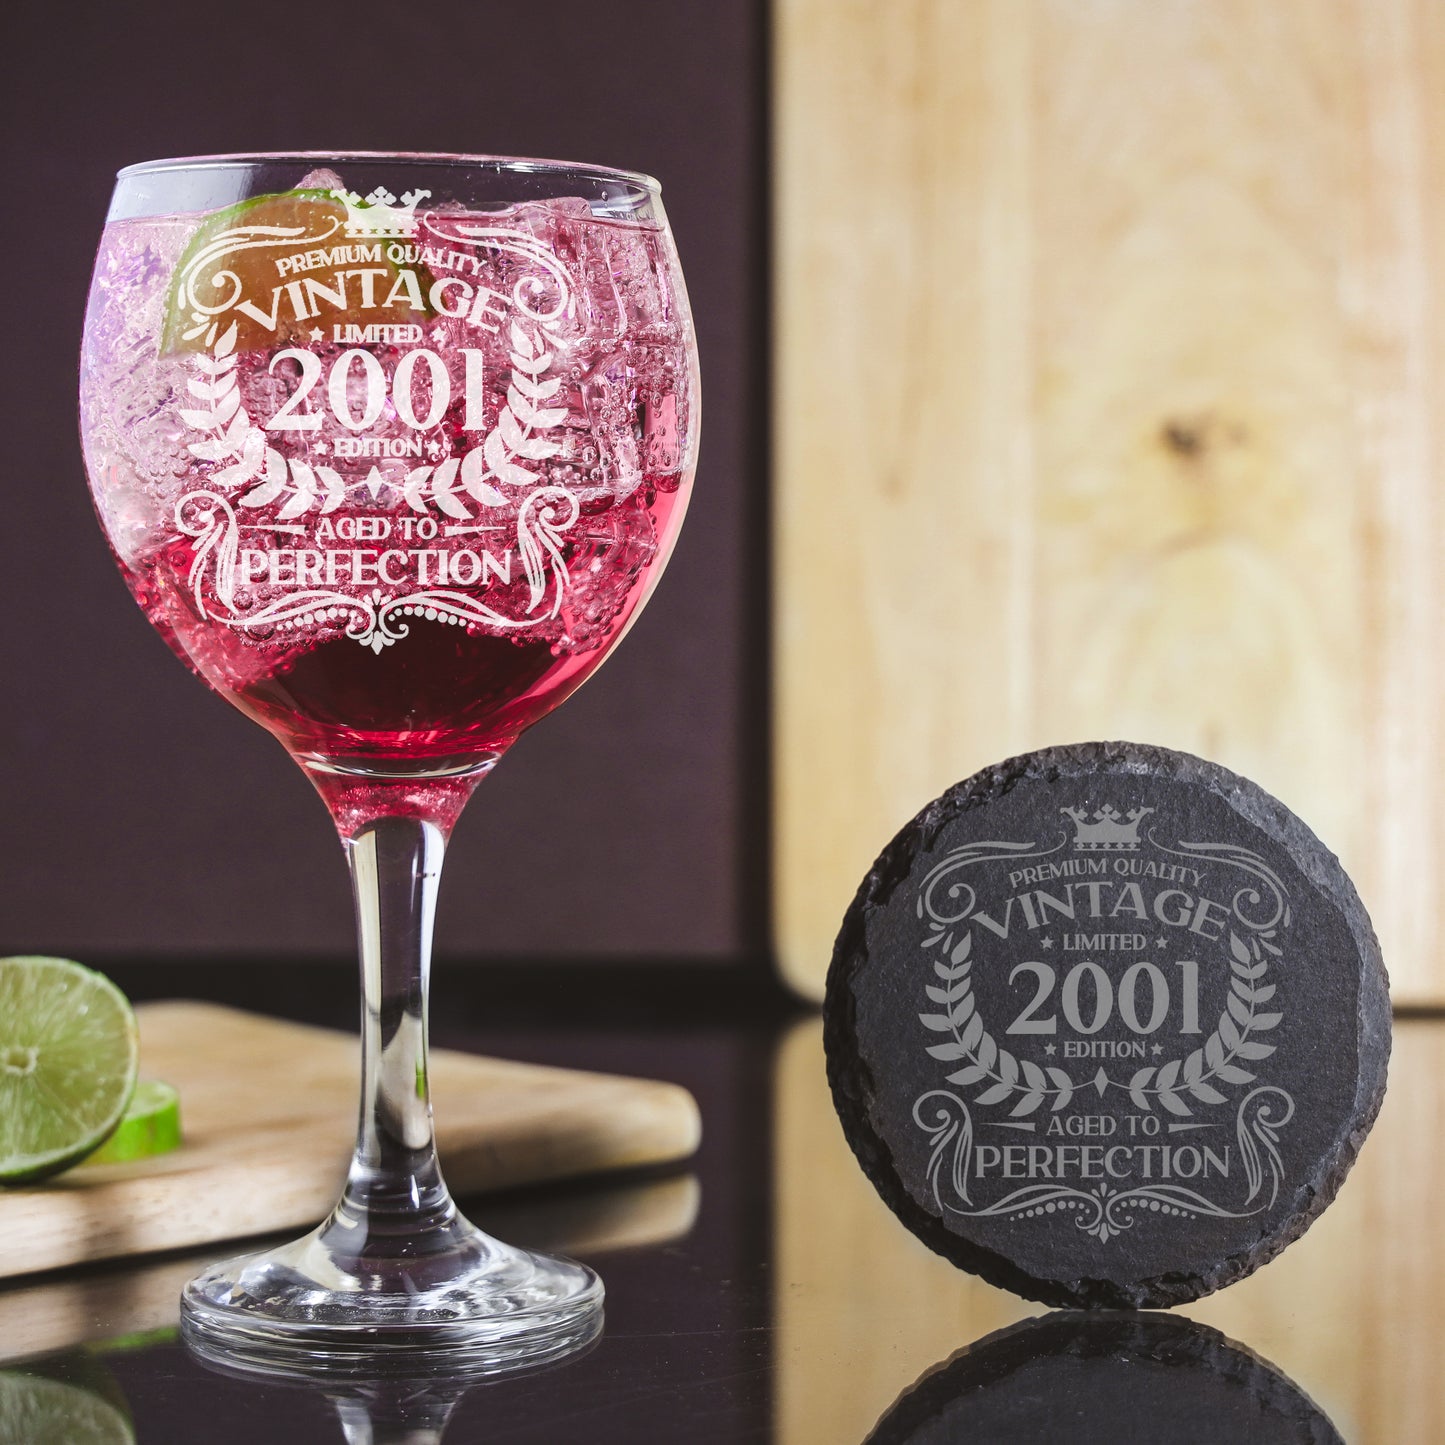 Vintage Engraved Balloon Gin Glass and/or Coaster Set Birthday Any Year All Ages  - Always Looking Good -   